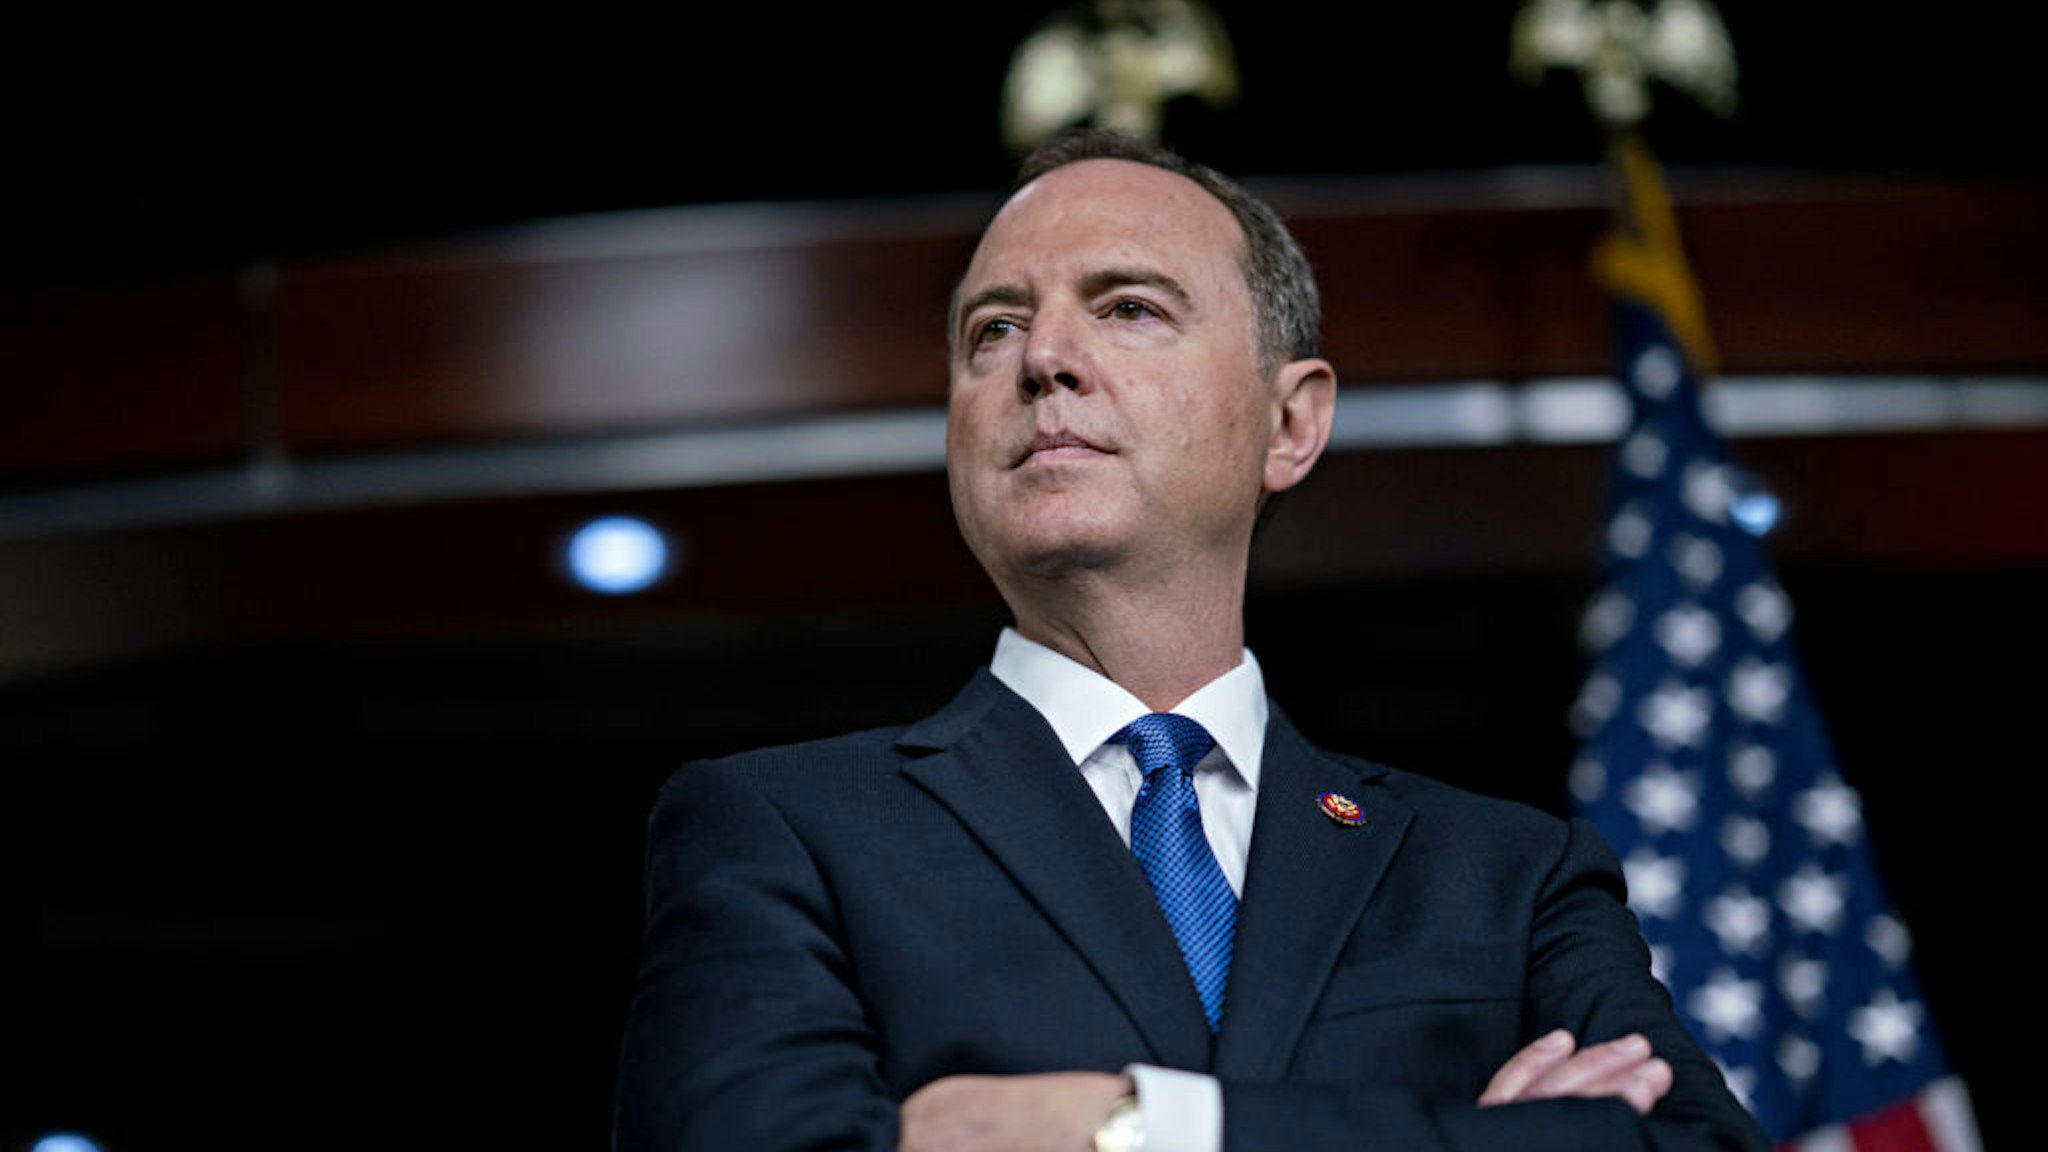 Representative Adam Schiff, a Democrat from California and chairman of the House Intelligence Committee, listens during a news conference on Capitol Hill in Washington, D.C., U.S., on Wednesday, Oct. 2, 2019. Three House committee chairmen threatened on Wednesday to subpoena the White House if it fails to adhere by Friday to document requests related to allegations that President Donald Trump pressured Ukraine into investigating one of his leading political rivals. Photographer: Andrew Harrer/Bloomberg